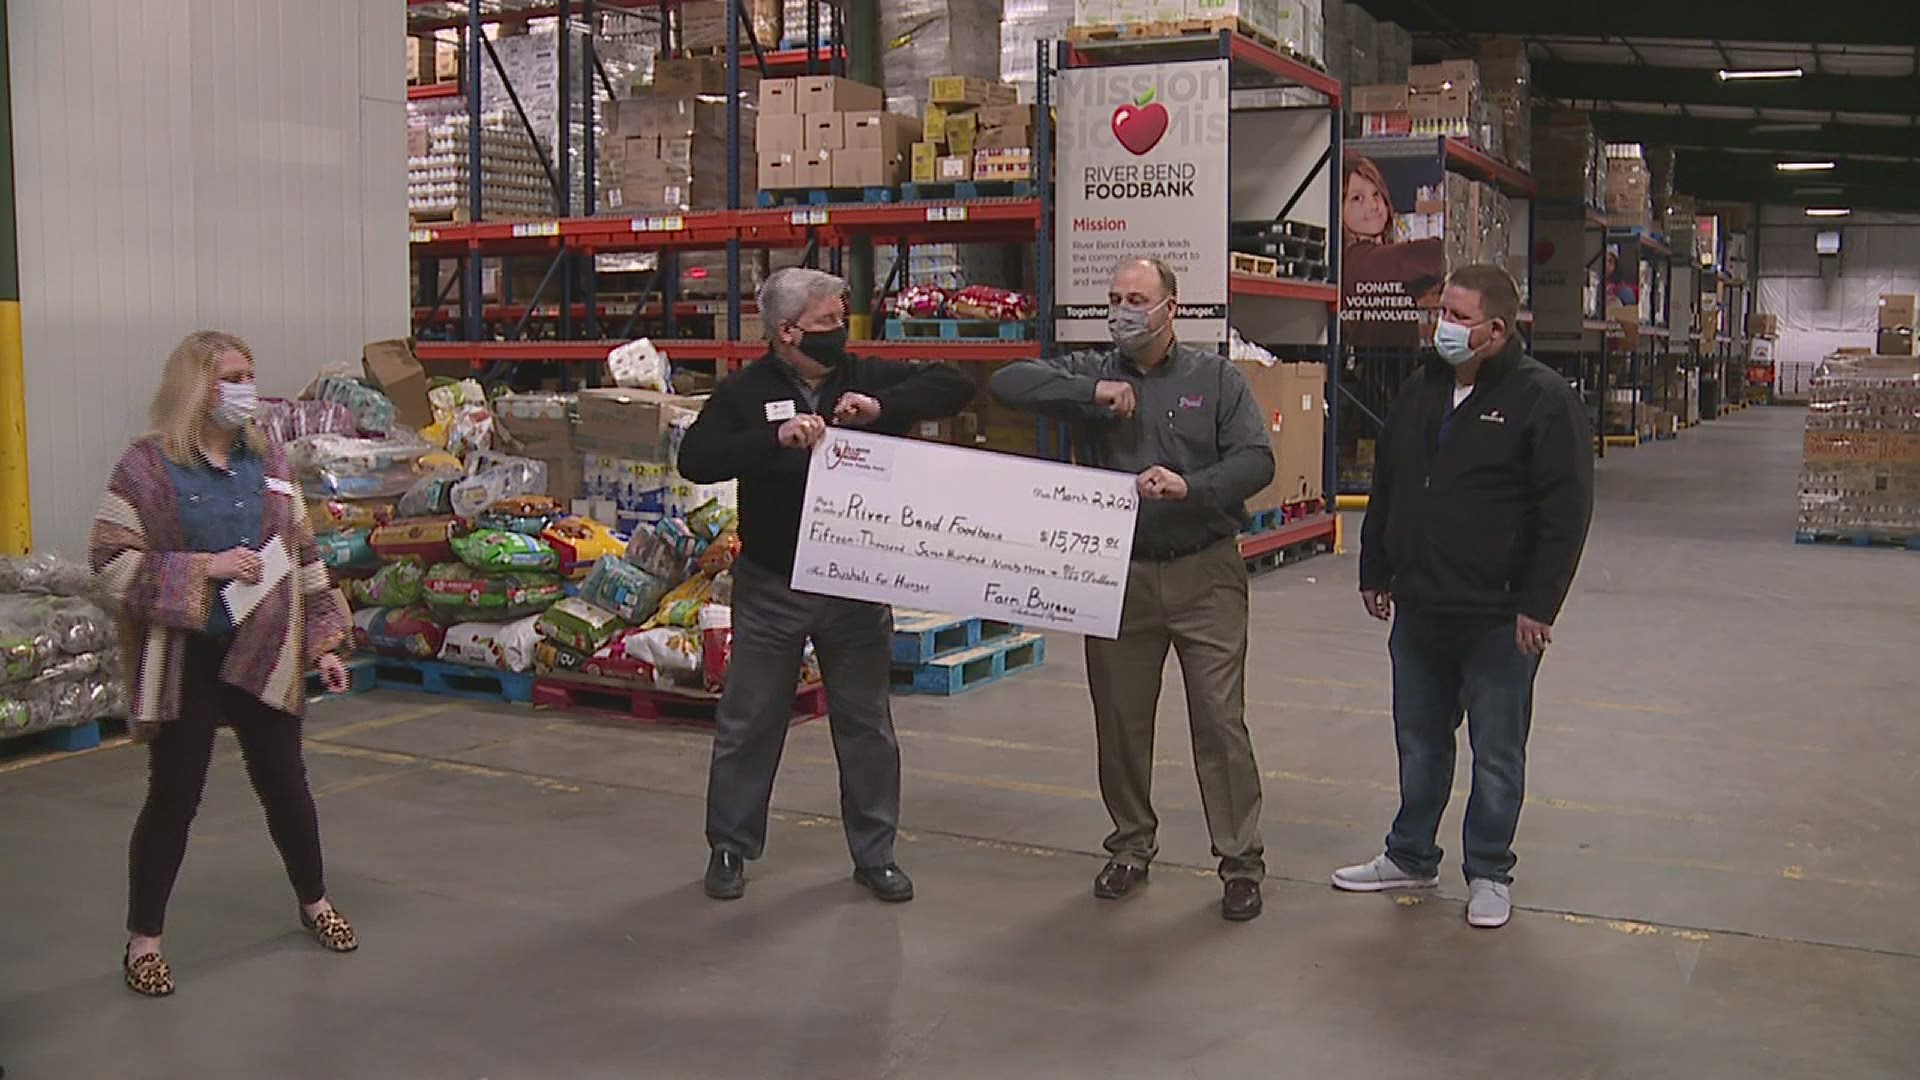 Since the program started in 2010, the Illinois Farm Bureau has donated more than 1.3M meals to families in need.